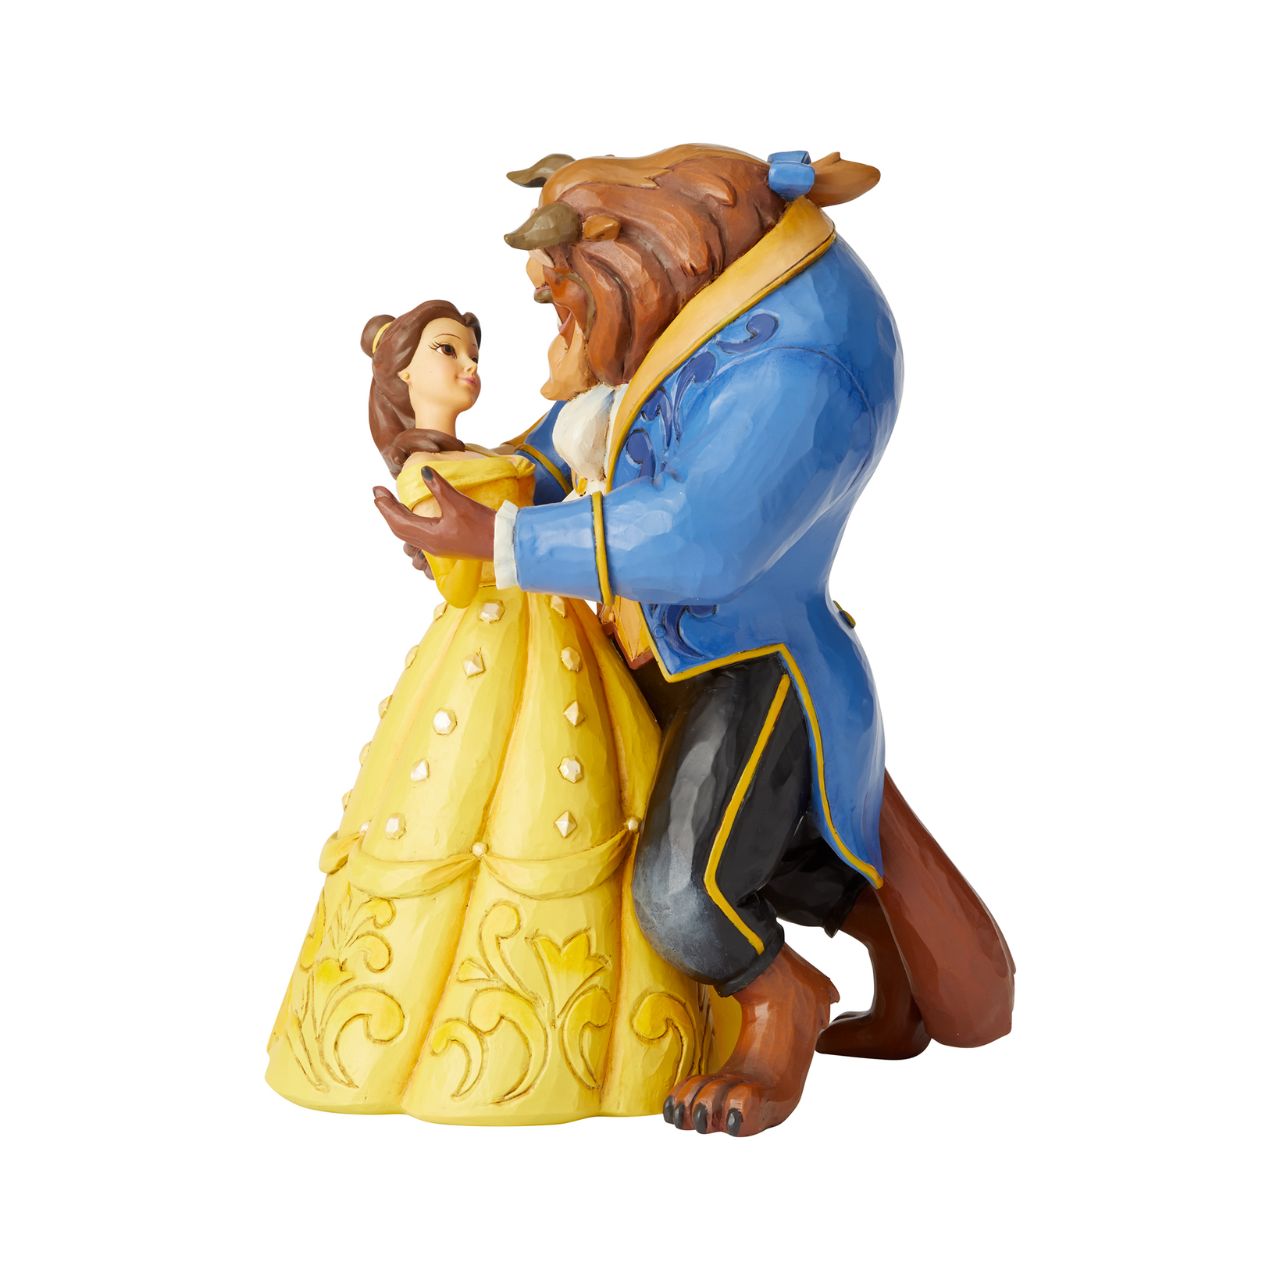 Disney Moonlight Waltz Beauty and The Beast Figurine by Jim Shore  Jim Shore celebrates the 25th anniversary of the Disney classic film Beauty and The Beast with this enchanting double figurine inspired by the romantic ballroom scene when Belle and her suitor discover their love is a tale as old as time.